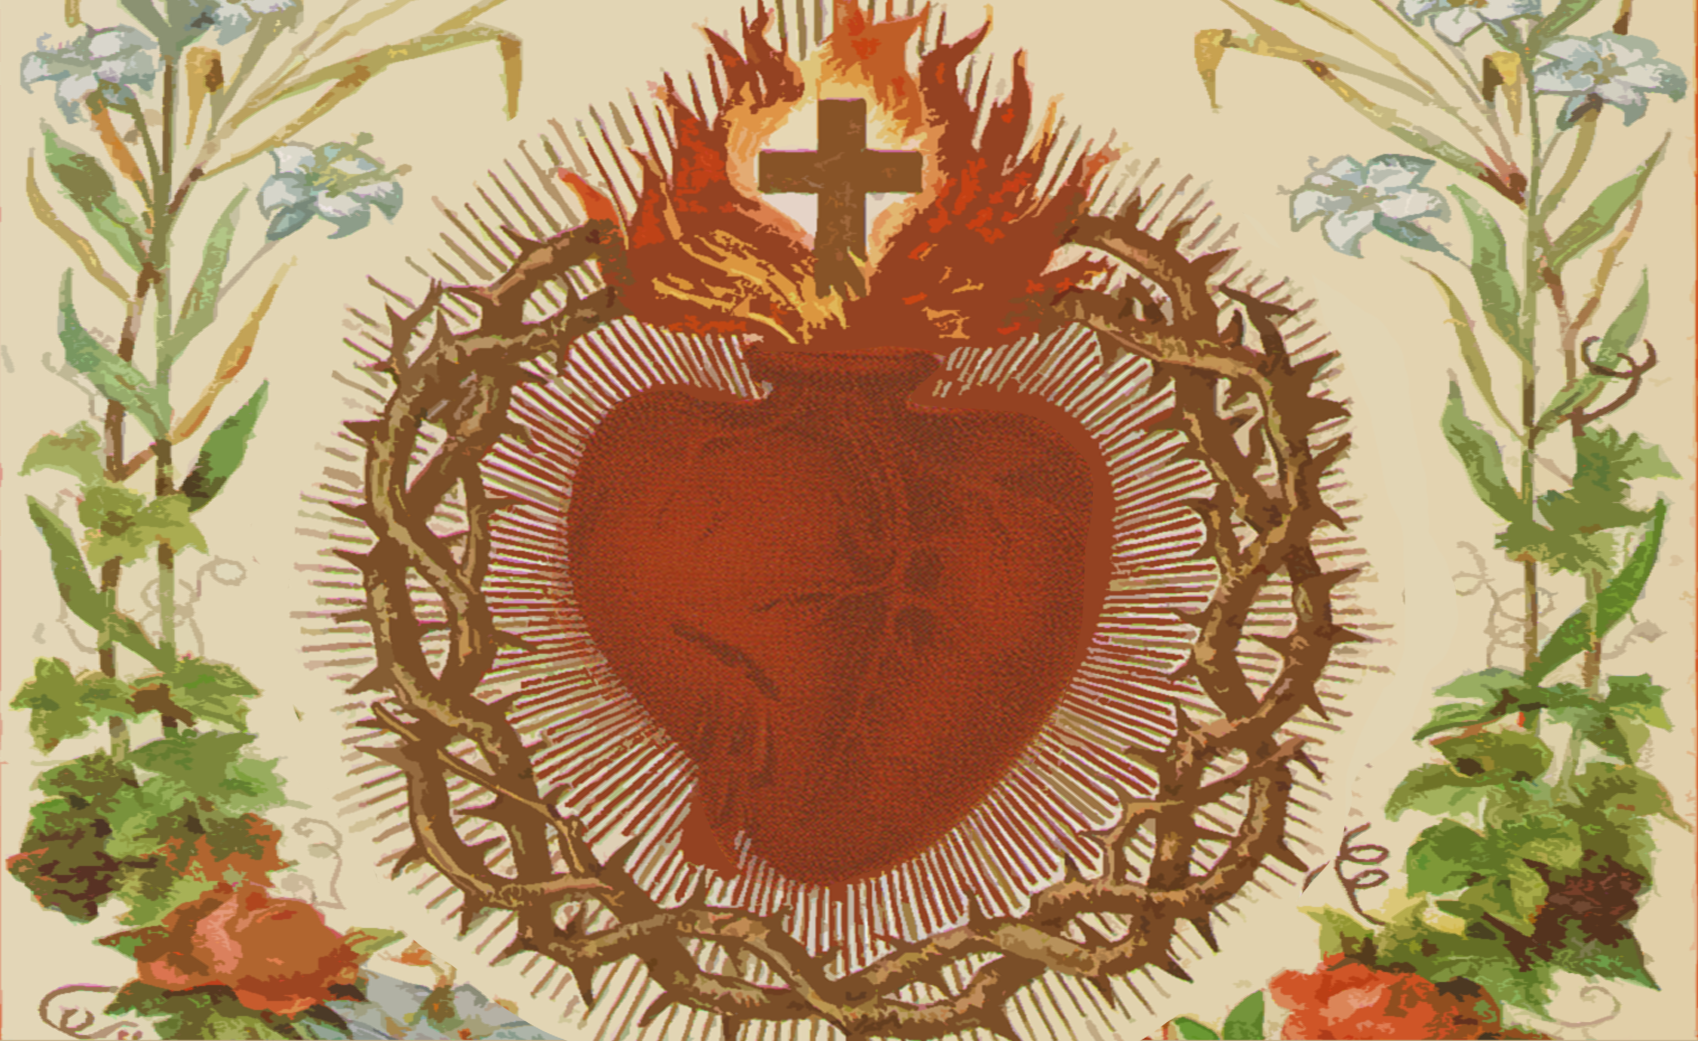 The Sacred Heart is an invitation to ask ourselves